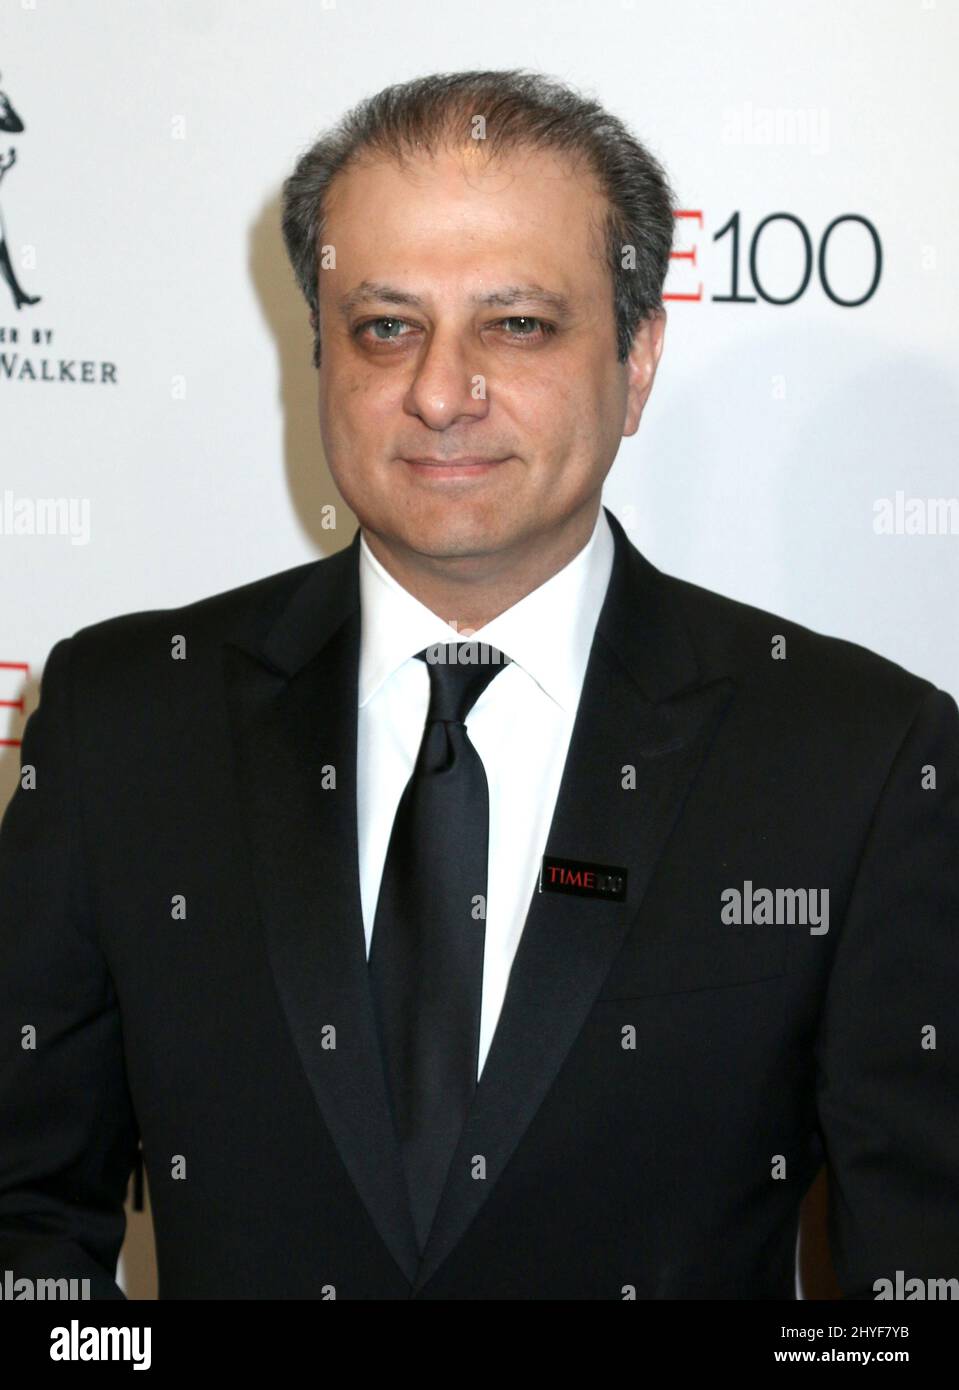 Preet Bharara attending the Time 100 Gala at Lincoln Center in New York Stock Photo